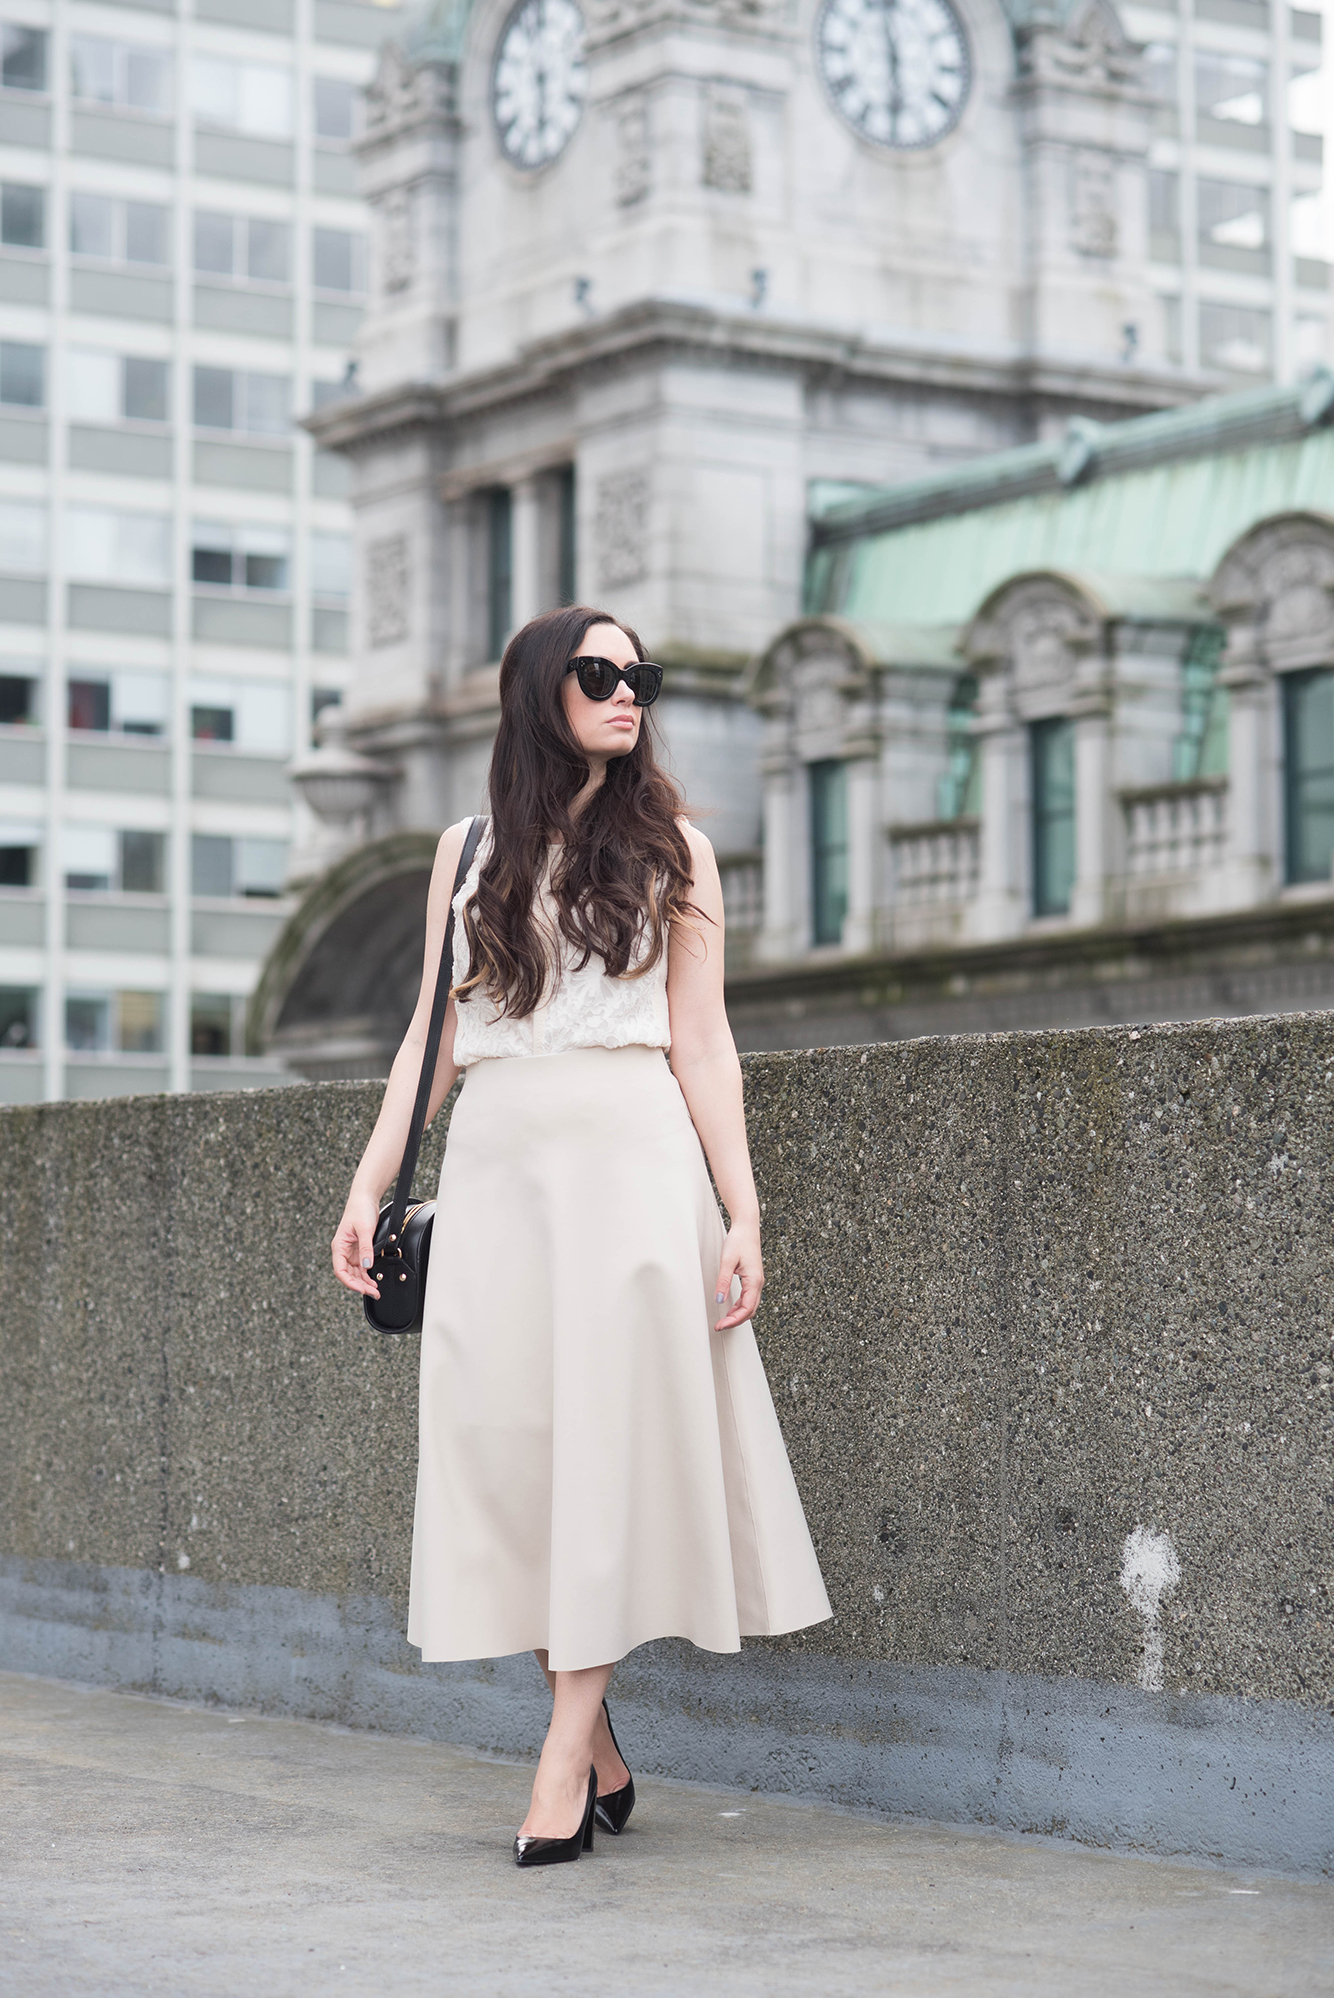 coco-and-vera-top-vancouver-style-blog-top-canadian-style-blog-top-blogger-street-style-marc-cain-lace-top-marc-cain-skirt-pierre-hardy-block-heels-apc-half-moon-bag-celine-audrey-sunglasses